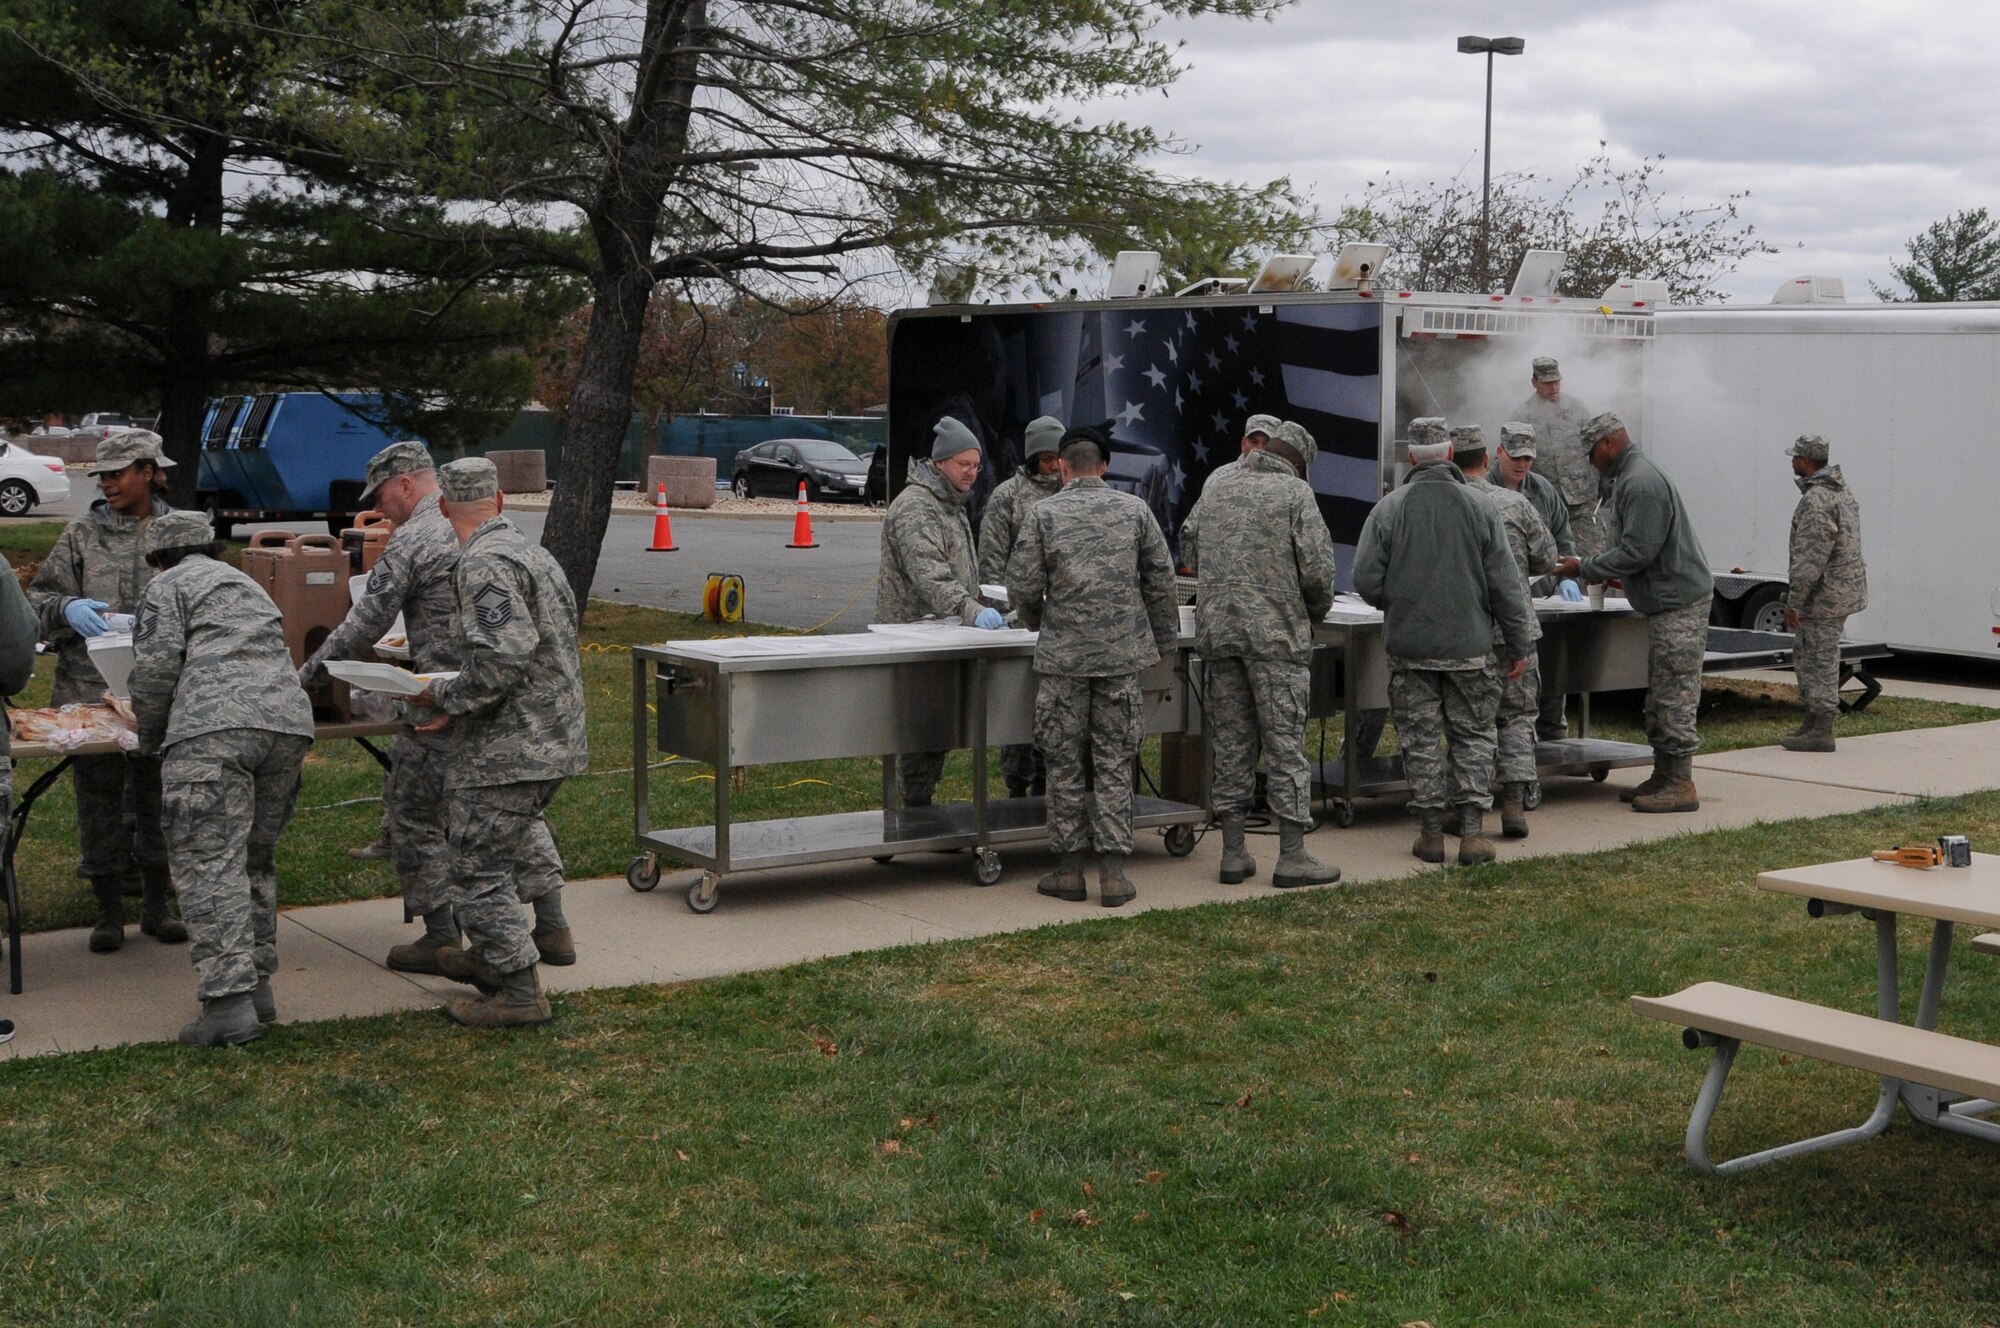 Airman from the 113th Wing wait in line to be fed during a new mobile field kitchen during a demonstration at Joint Base Andrews, Md., Nov. 3. The Disaster Relief Mobile Kitchen Trailer  can deploy to natural disaster sites to provide hot meals to relief workers and Airmen working in austere conditions. (U.S. Air force photo by Airman 1st Class Sumena Leslie/Released)